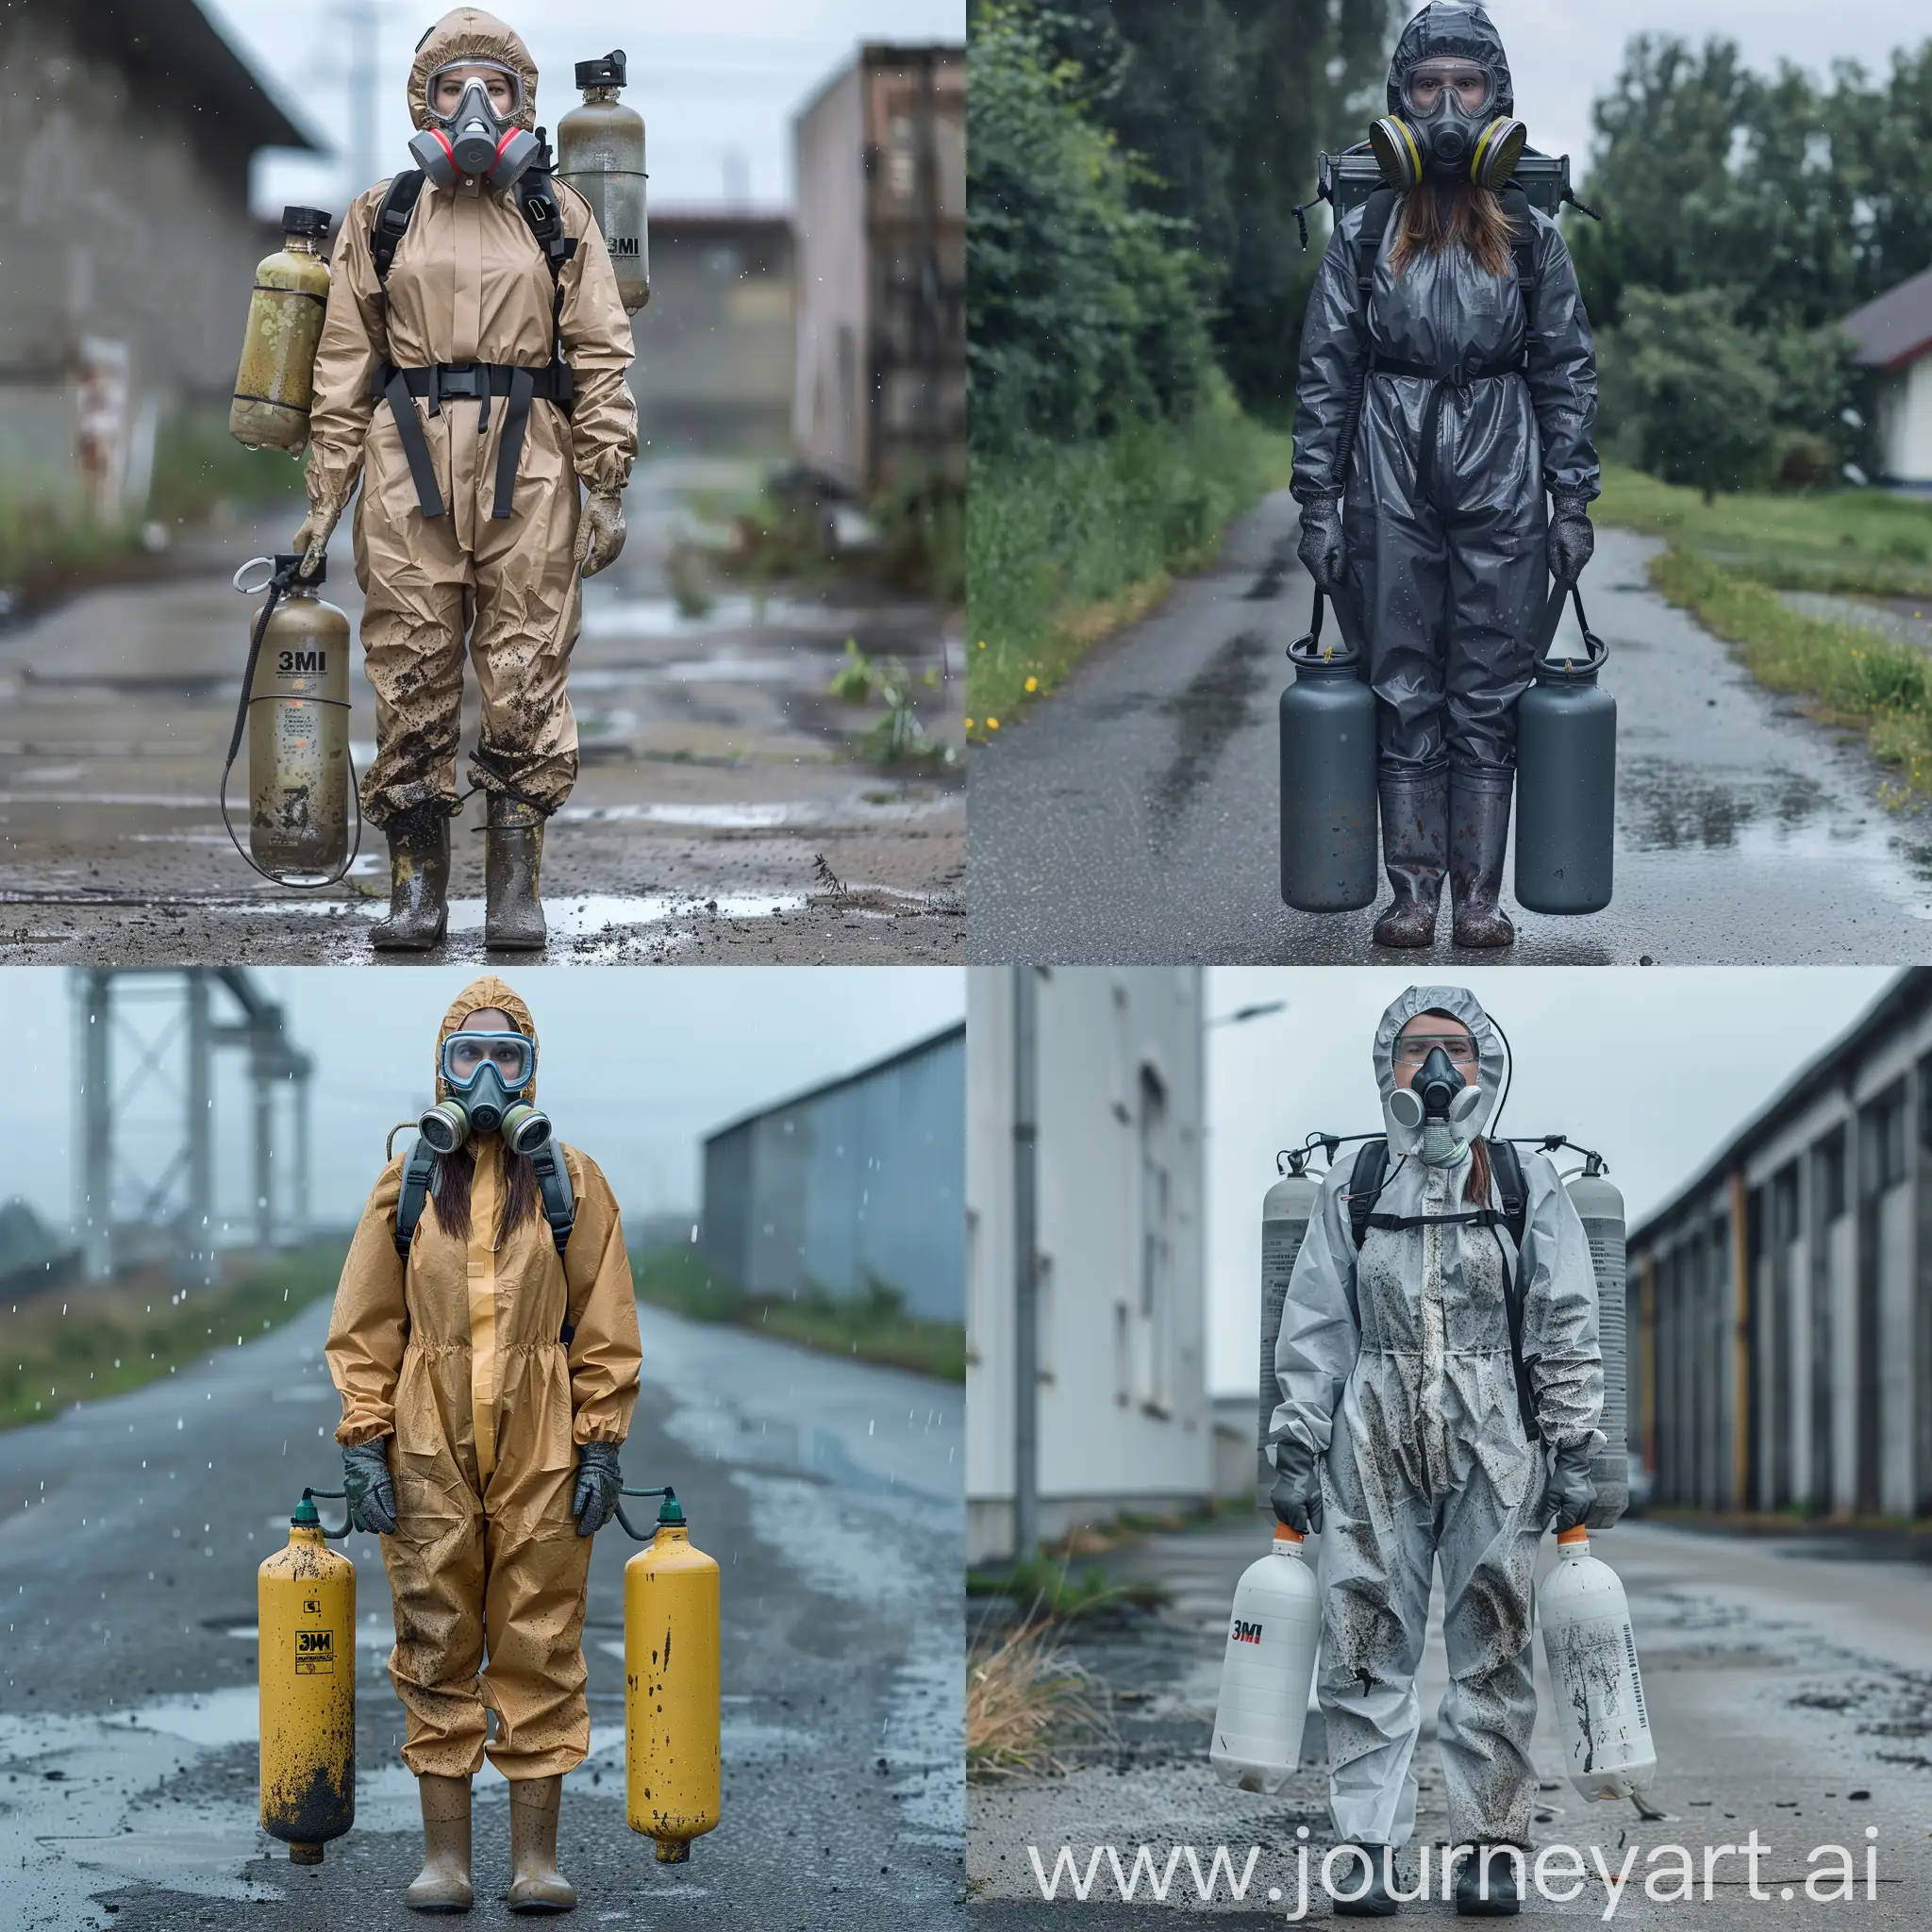 woman, protective gear, rubber, strong hazmat suit with hood, fullbody, 3M fullface mask with visor, oxygen tanks on the back, rubber gloves, rubber shoes, full-length photo, drops of mud on suit, outdoor, rainy day, pavement